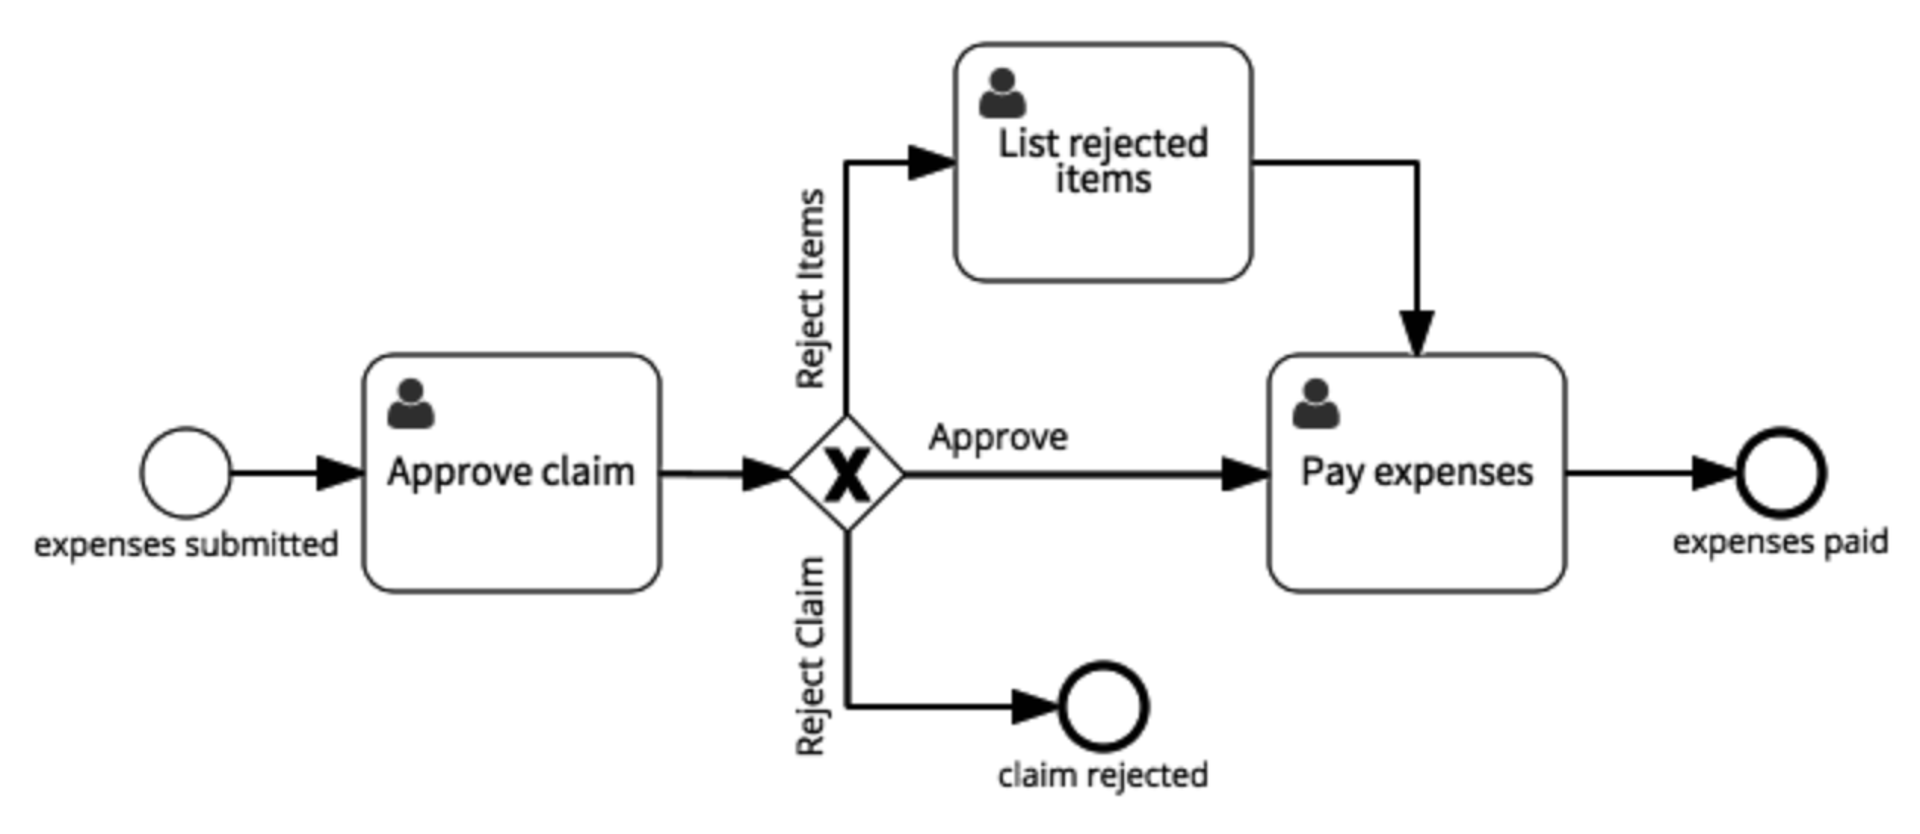 Approve Expense Claim Workflow Example